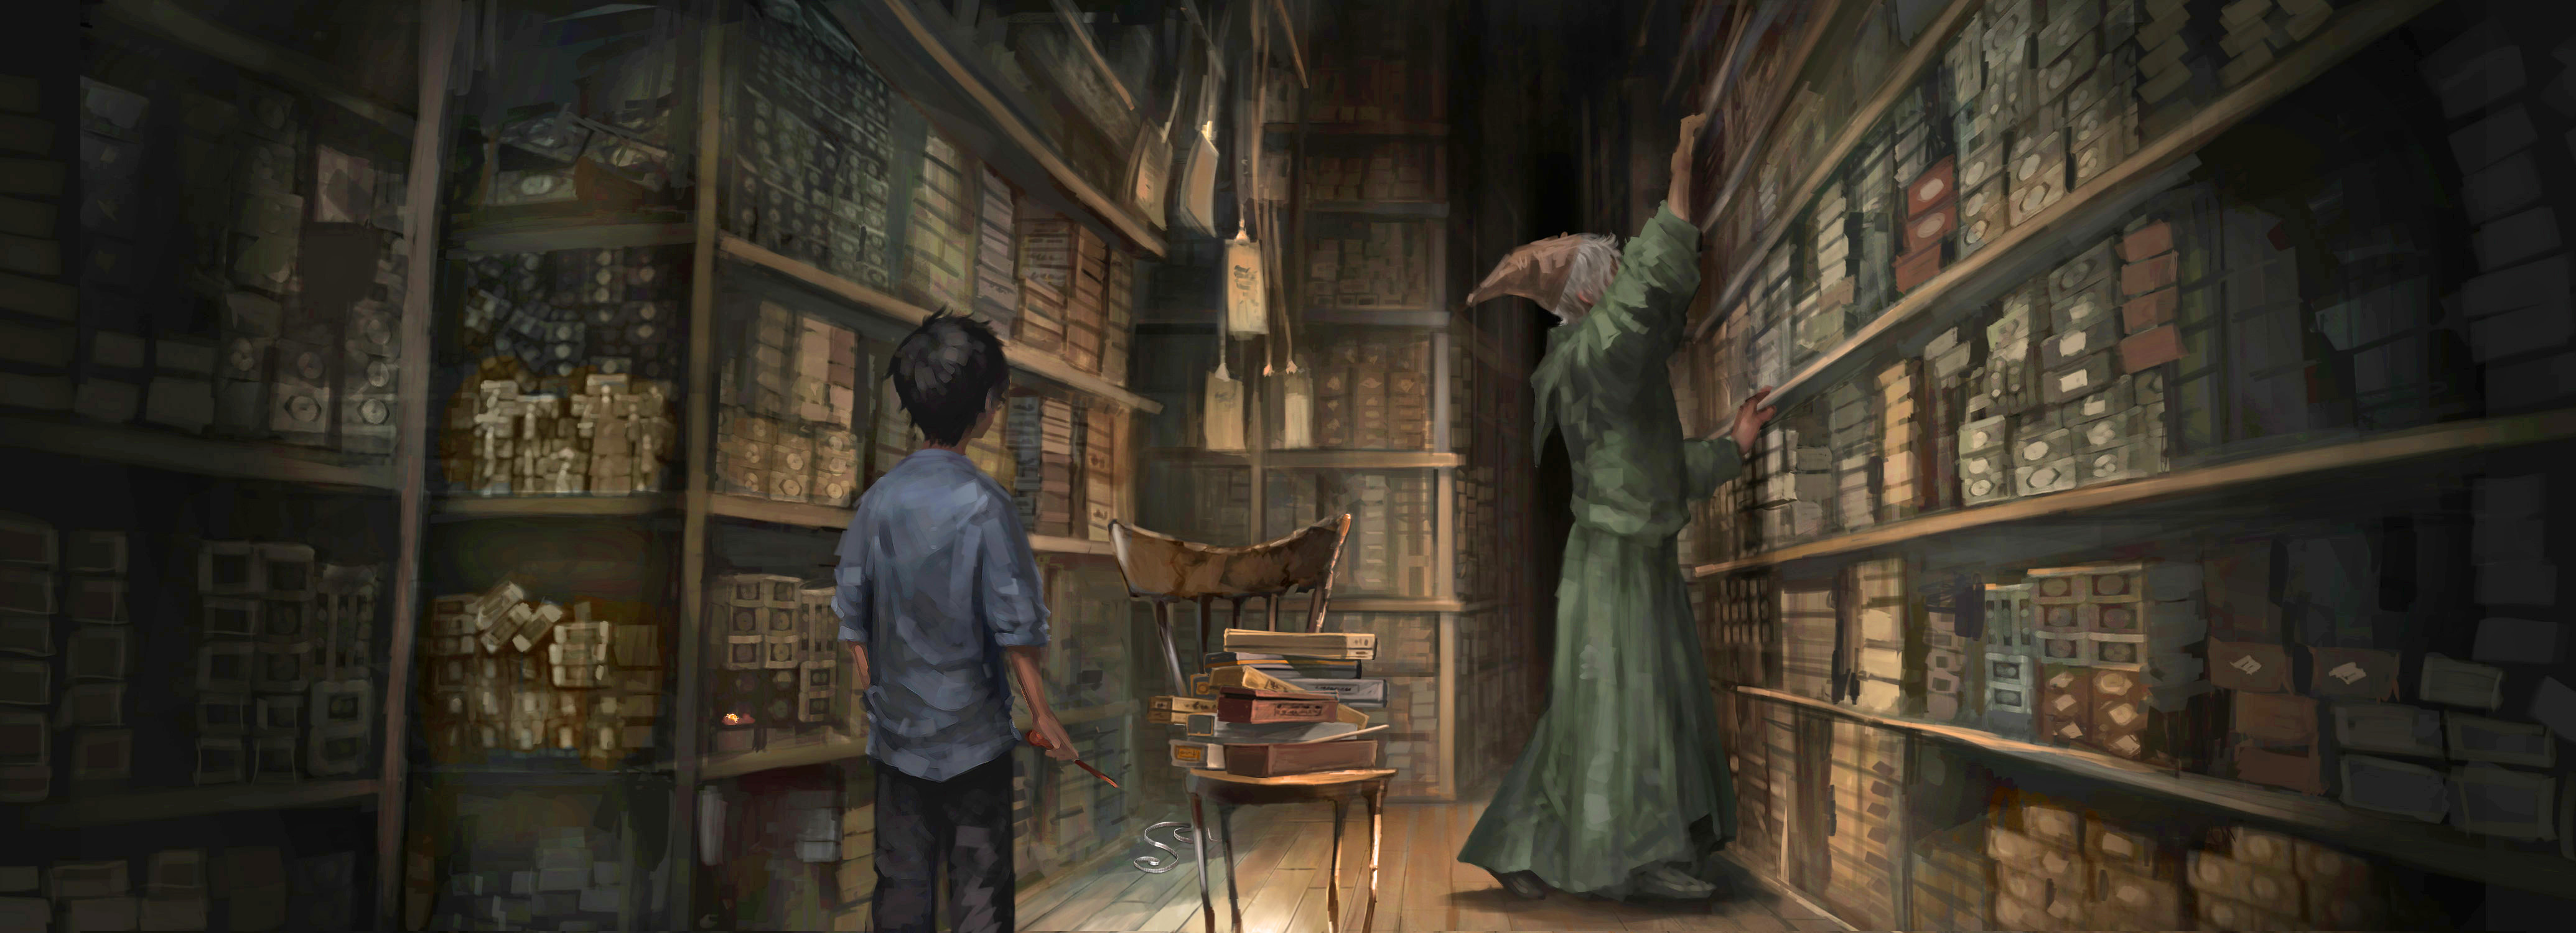 The Harry Potter Books: The Ancient and Mysterious Wands of Ollivander's